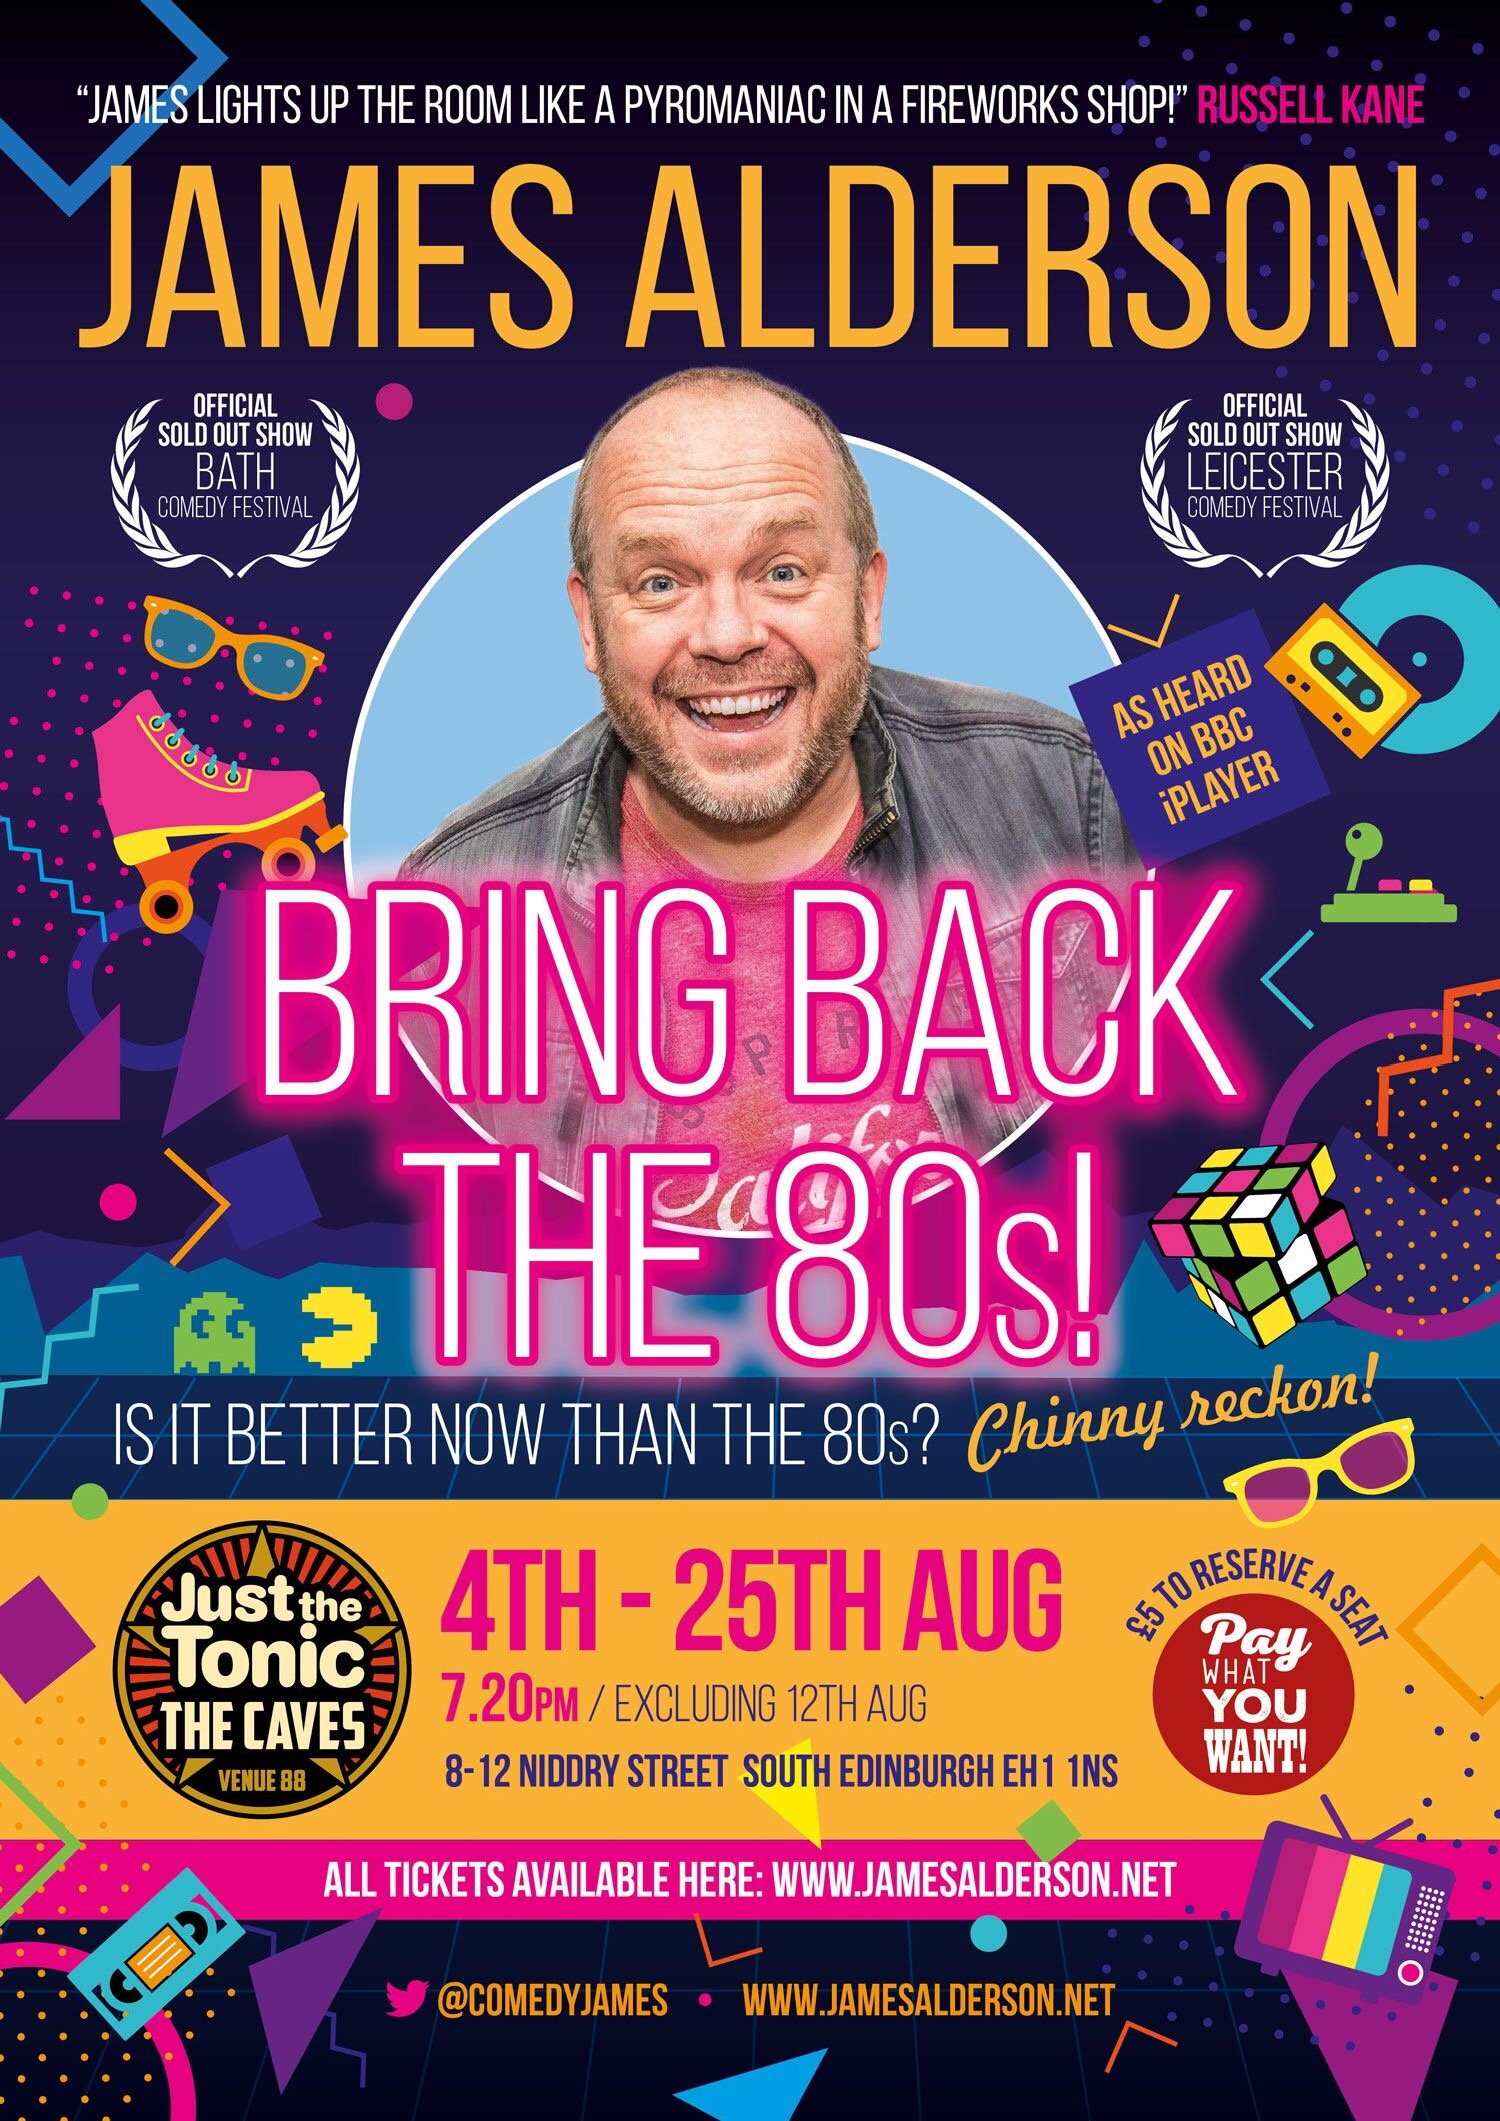 The poster for Bring Back the 80s